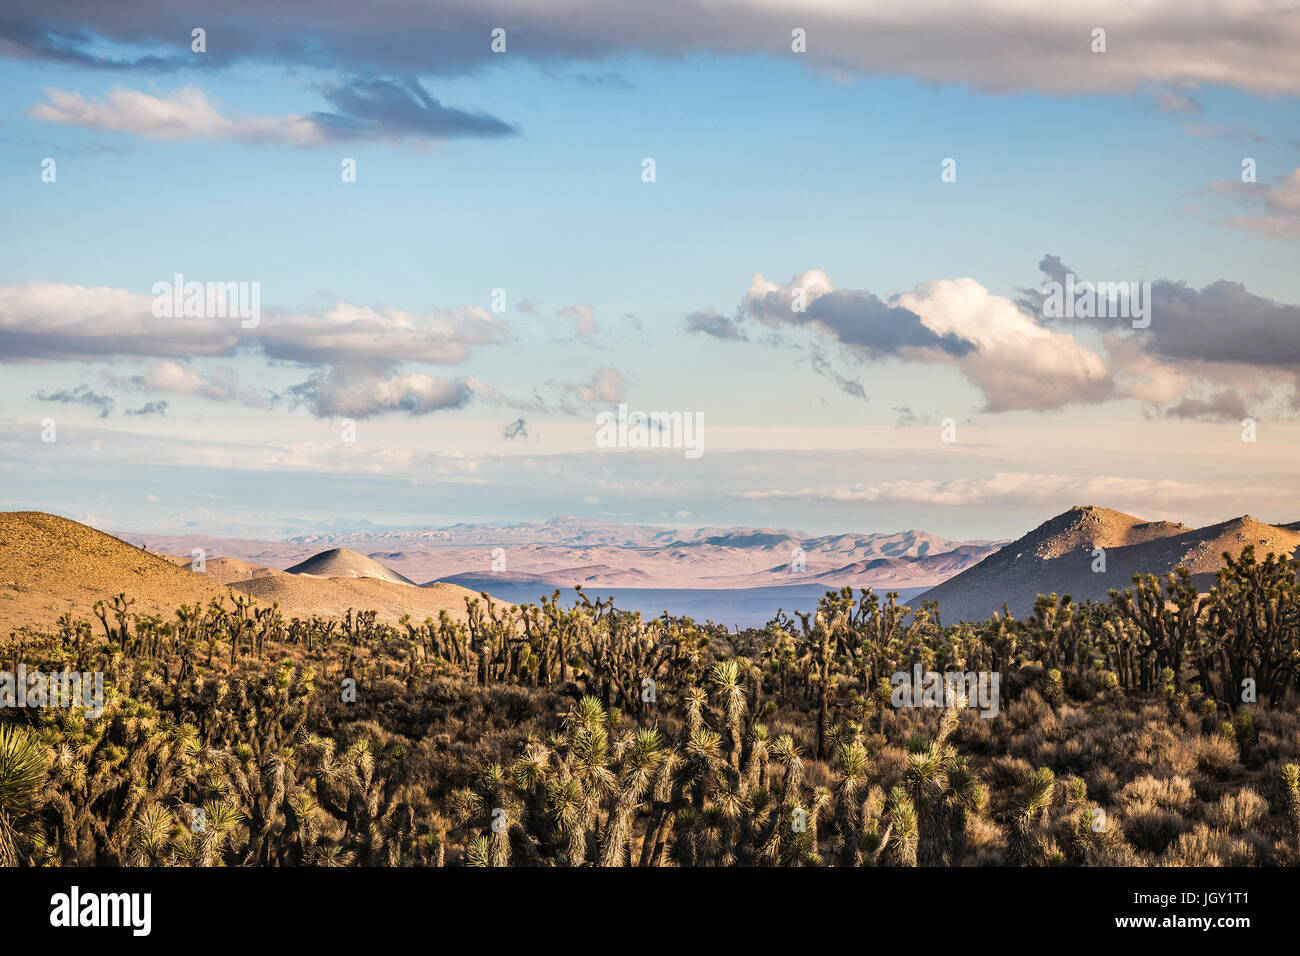 Landscape with cacti in Death Valley National Park, California, USA Stock Photo